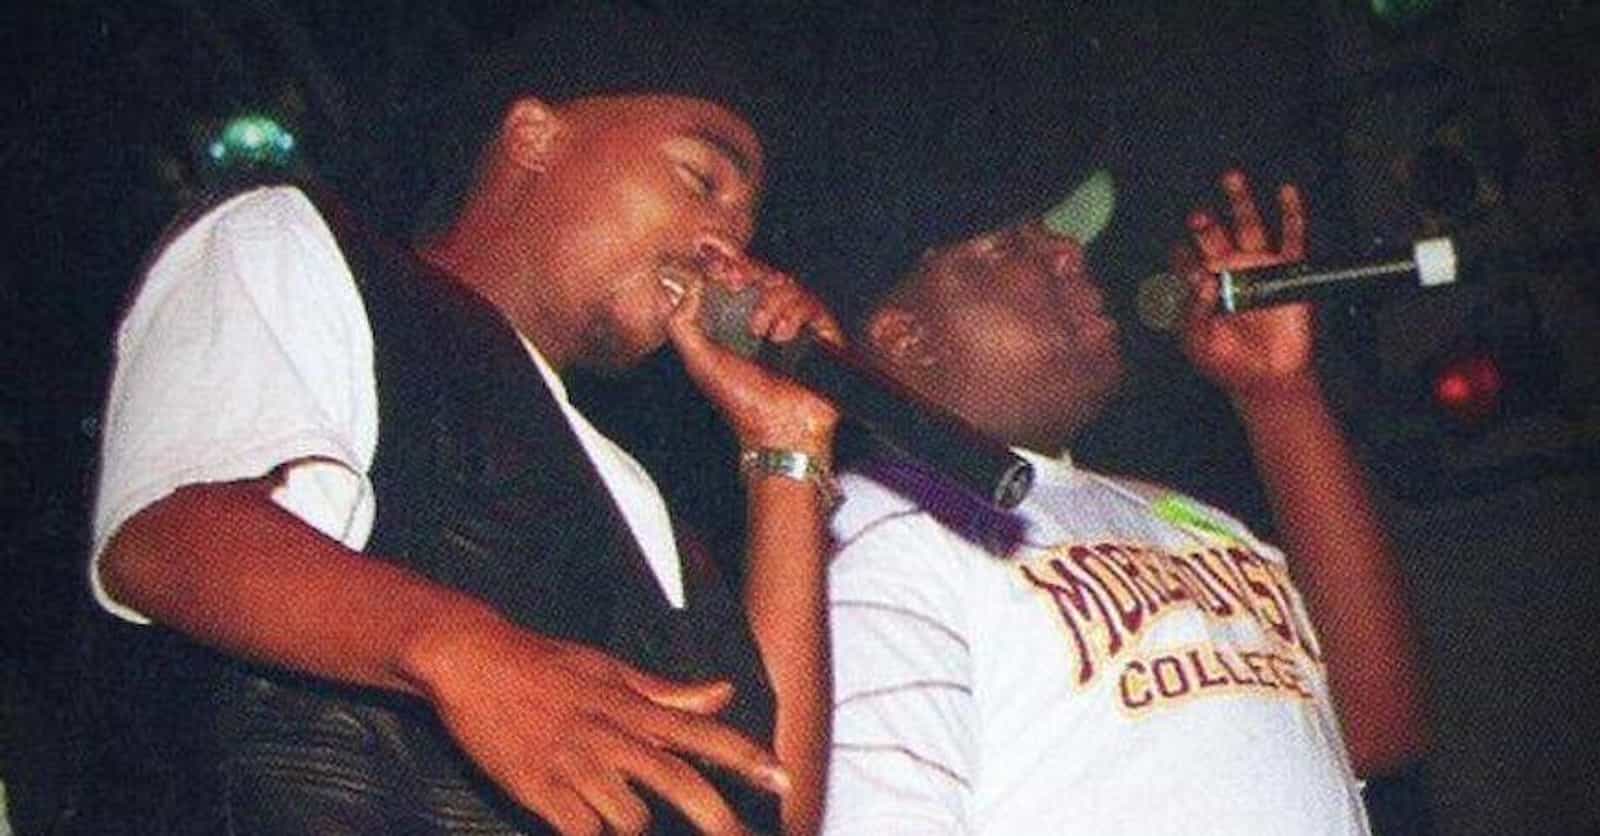 A Timeline Of How Biggie And Tupac's Friendship Turned Into An Infamous Feud